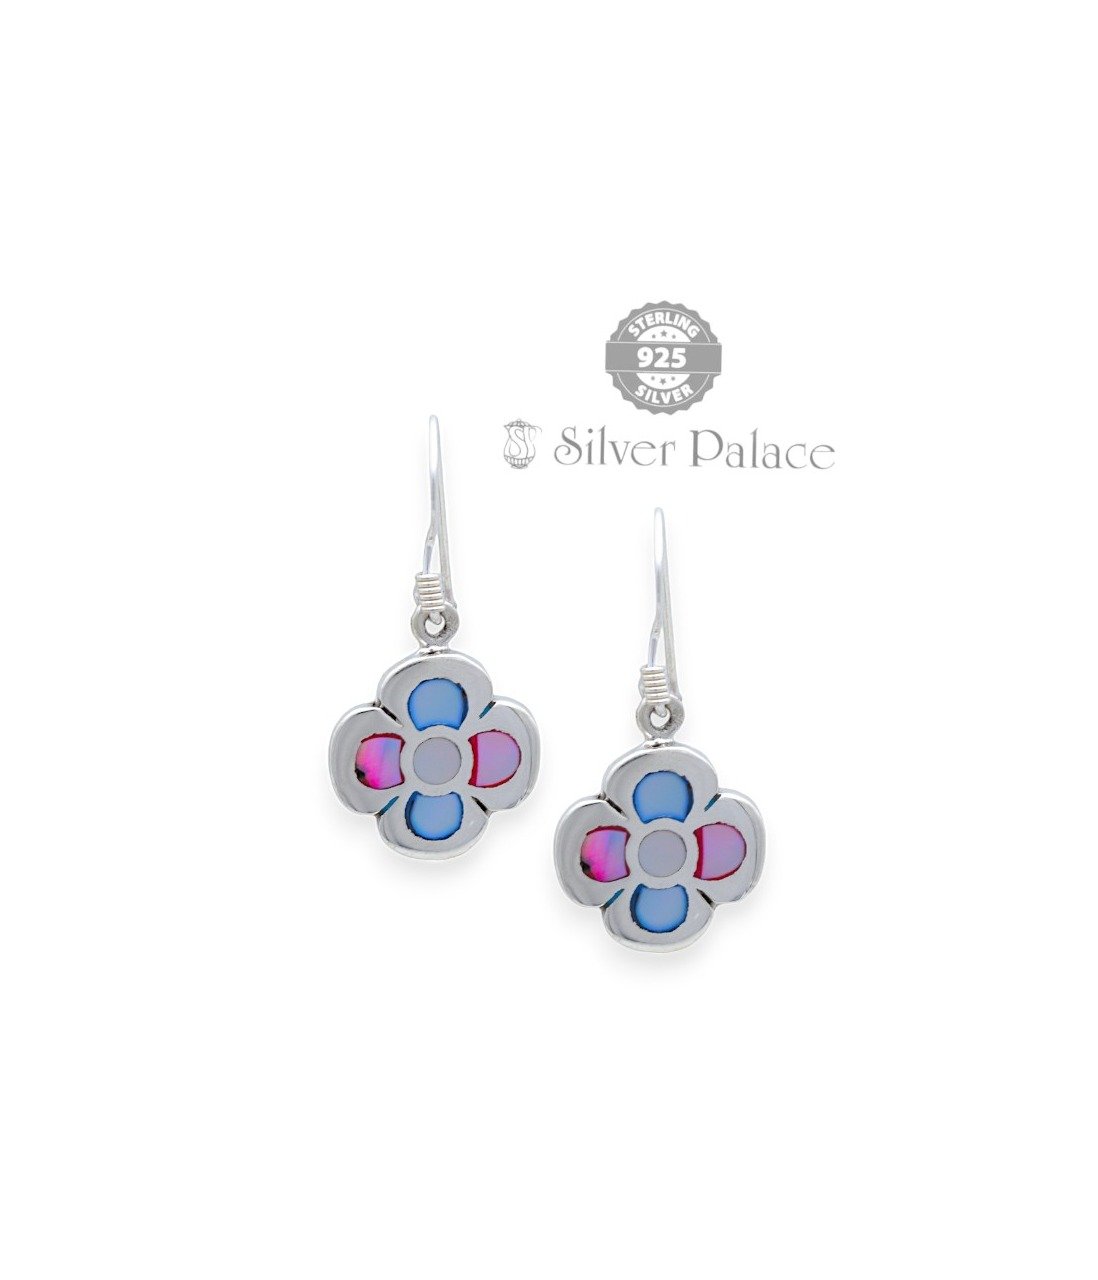 STERLING SILVER BLUE & PINK FLOWER DESIGN EARRINGS TRISHE COLLECTION 